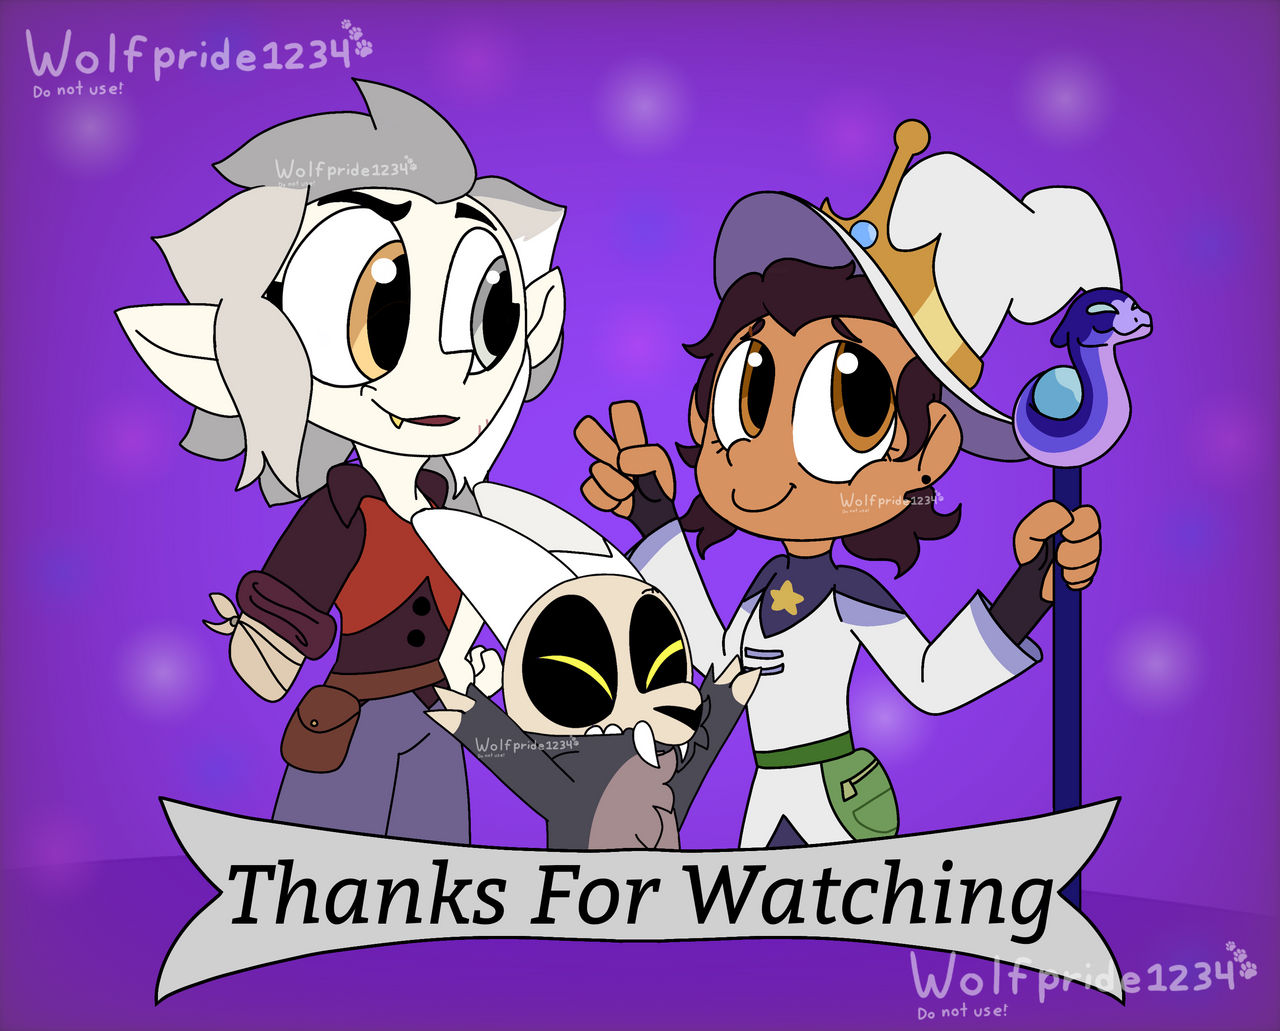 Say Goodbye To The Owl House Cast, Everyone! by Powerquiles on DeviantArt